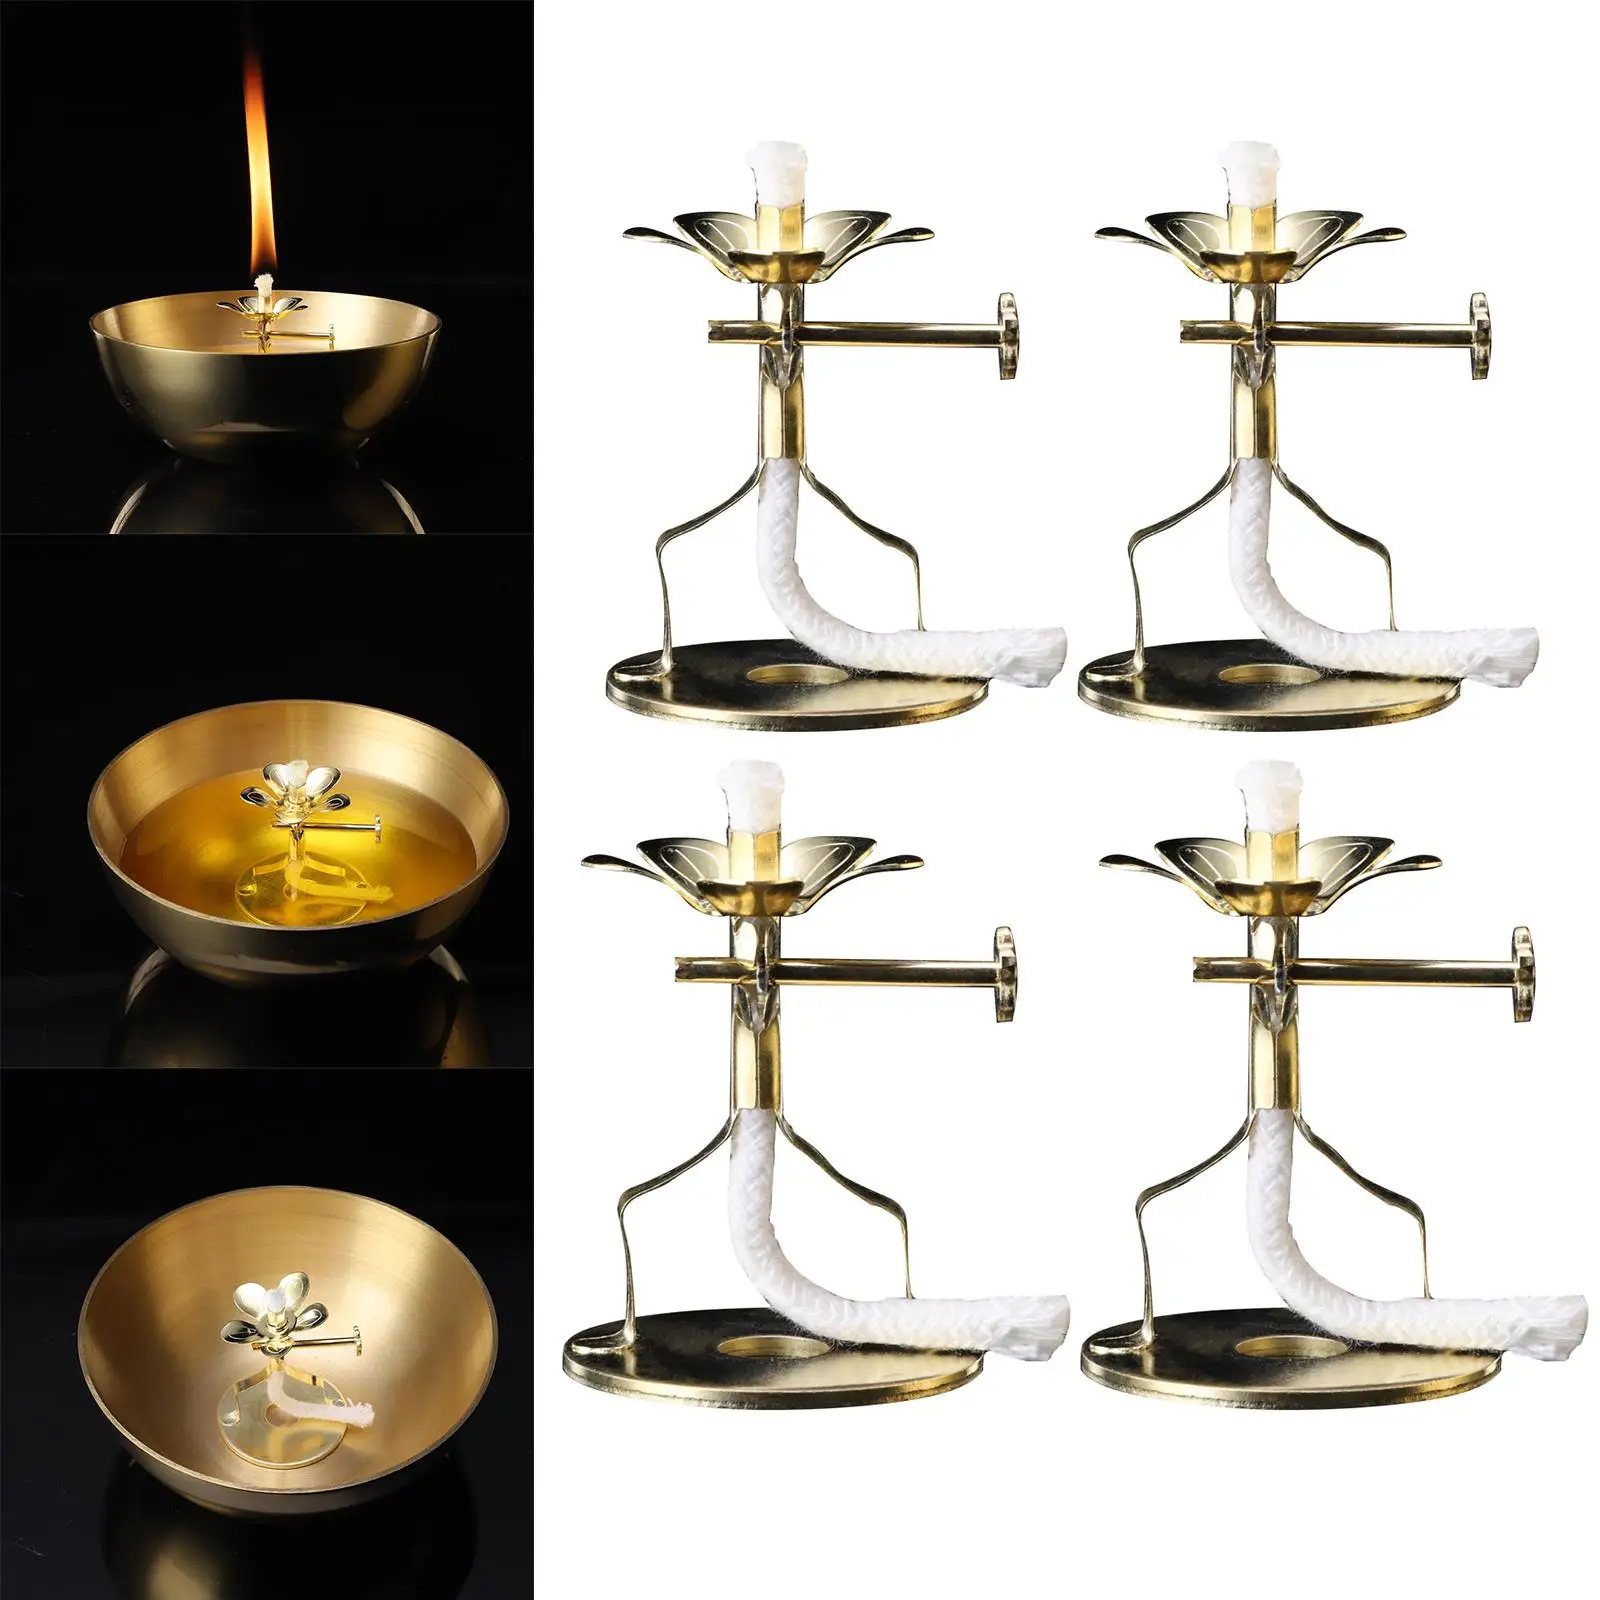  Lamp Wick Holder Wick Lamp Stand Adjustable Tealight Oil Lamp Stand Buddha Ghee Lamp Holder for Party Christmas